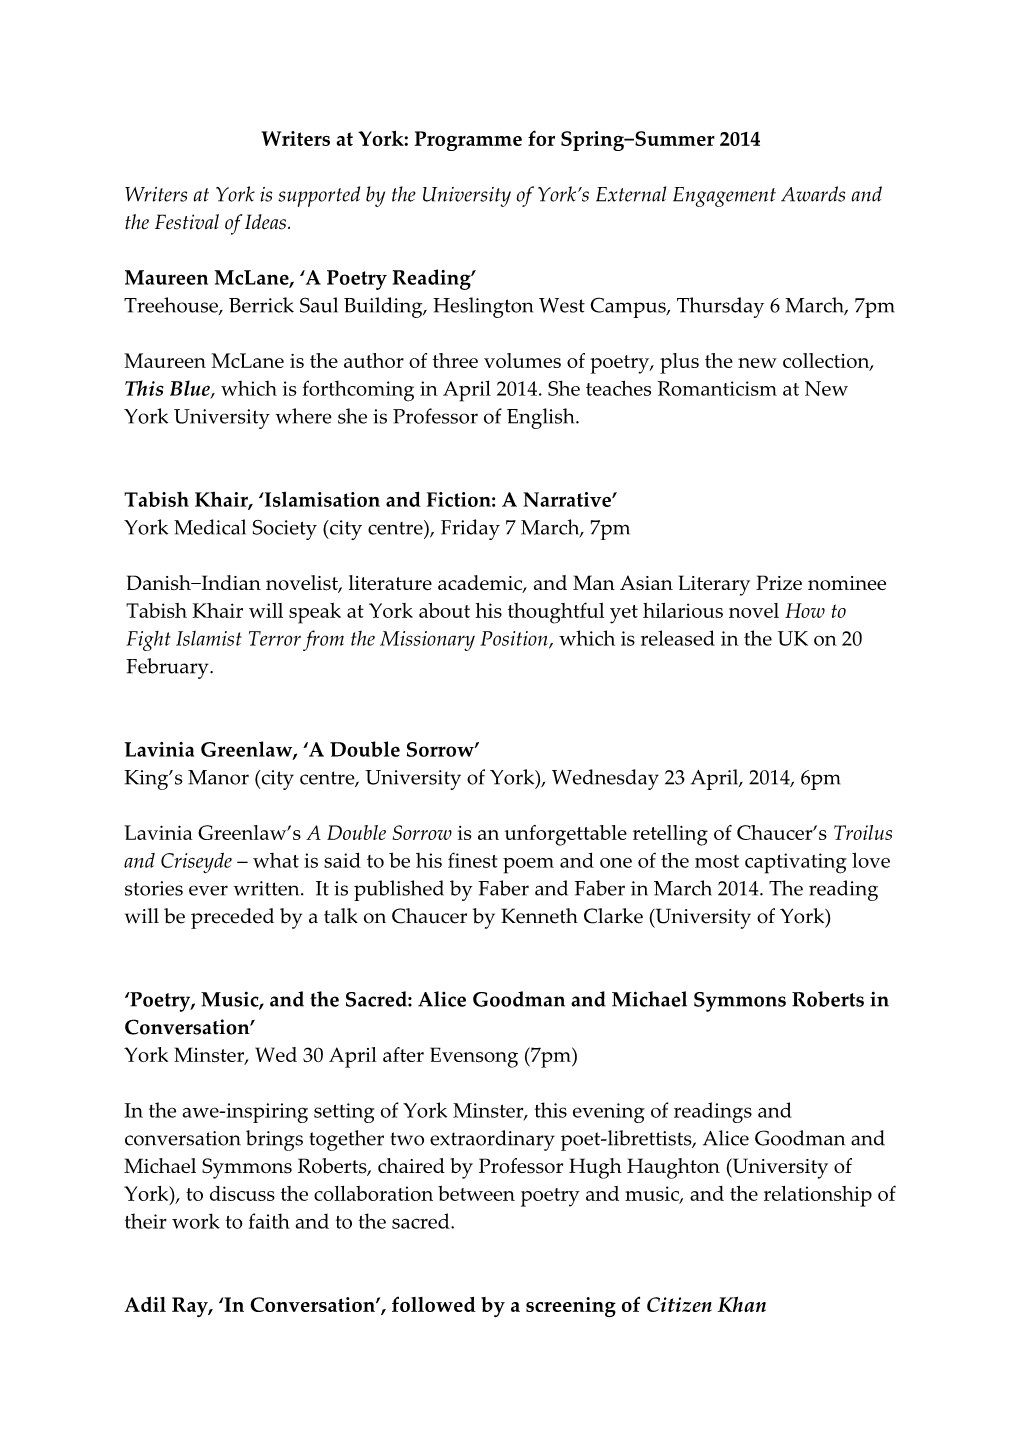 Writers at York: Programme for Spring Summer 2014